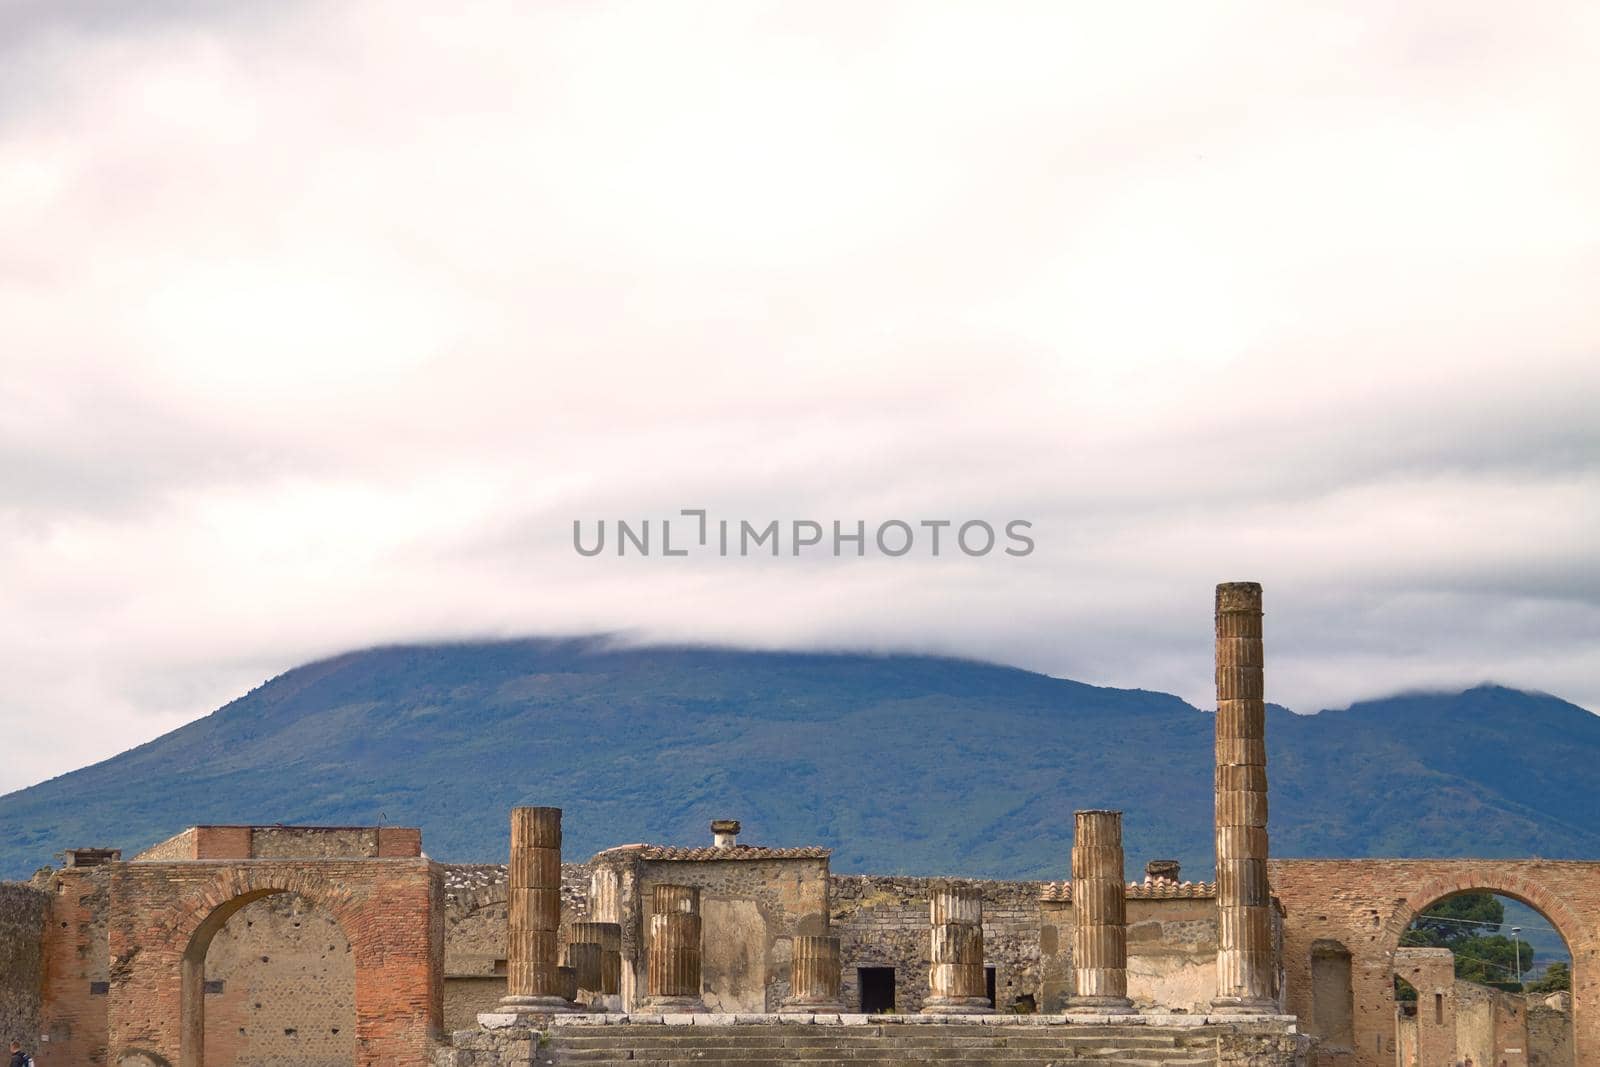 Ruins and Remains of the city of Pompeii Italy.